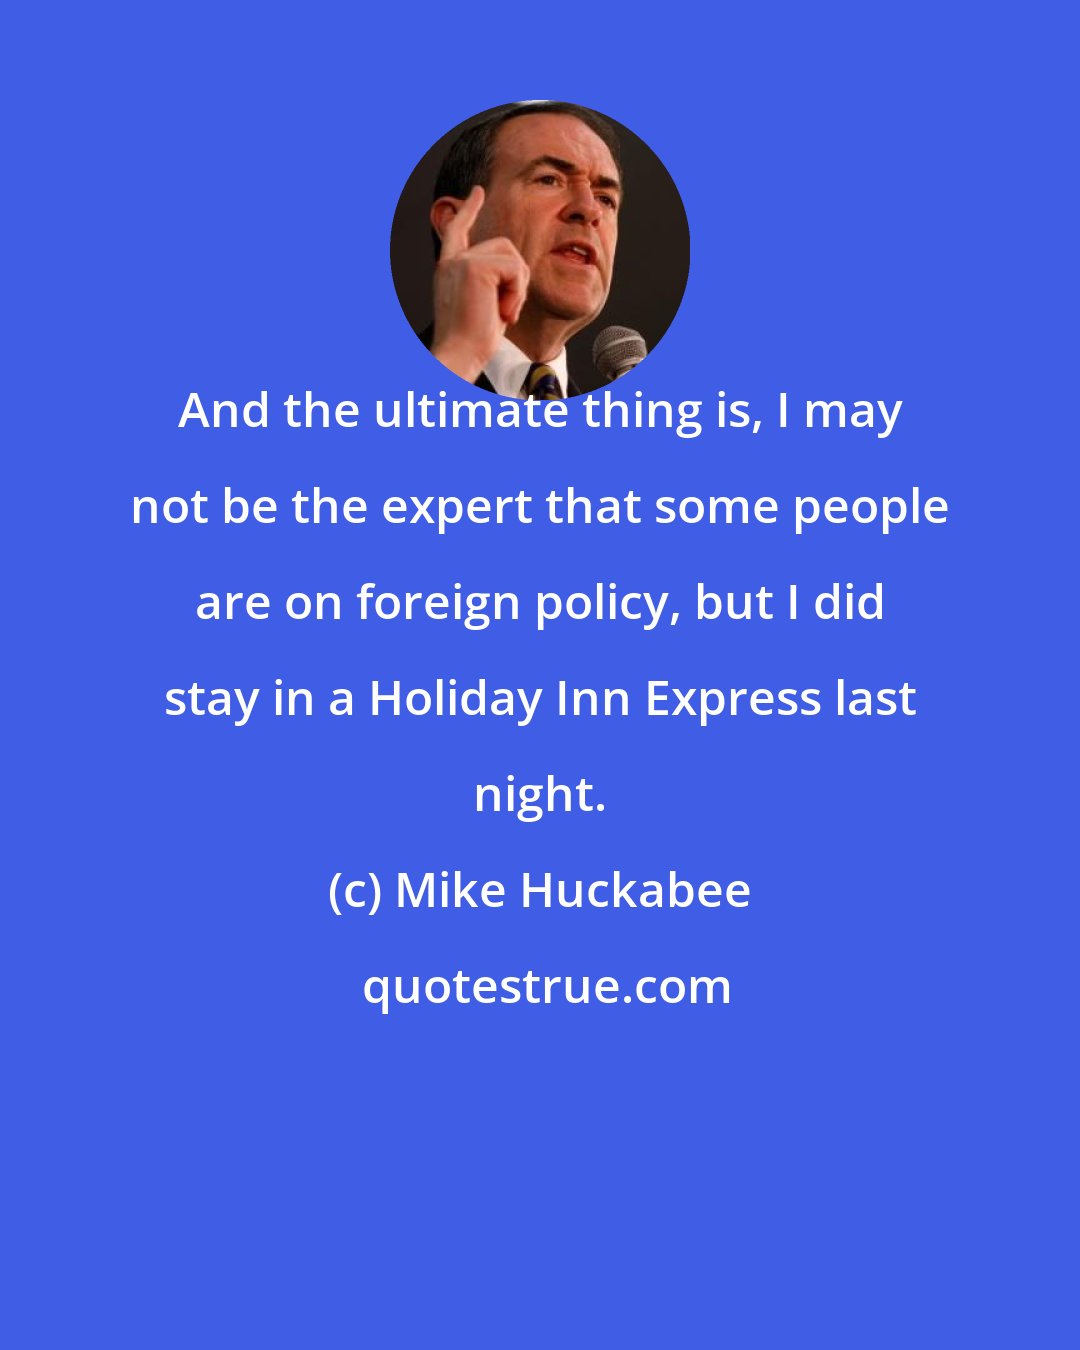 Mike Huckabee: And the ultimate thing is, I may not be the expert that some people are on foreign policy, but I did stay in a Holiday Inn Express last night.